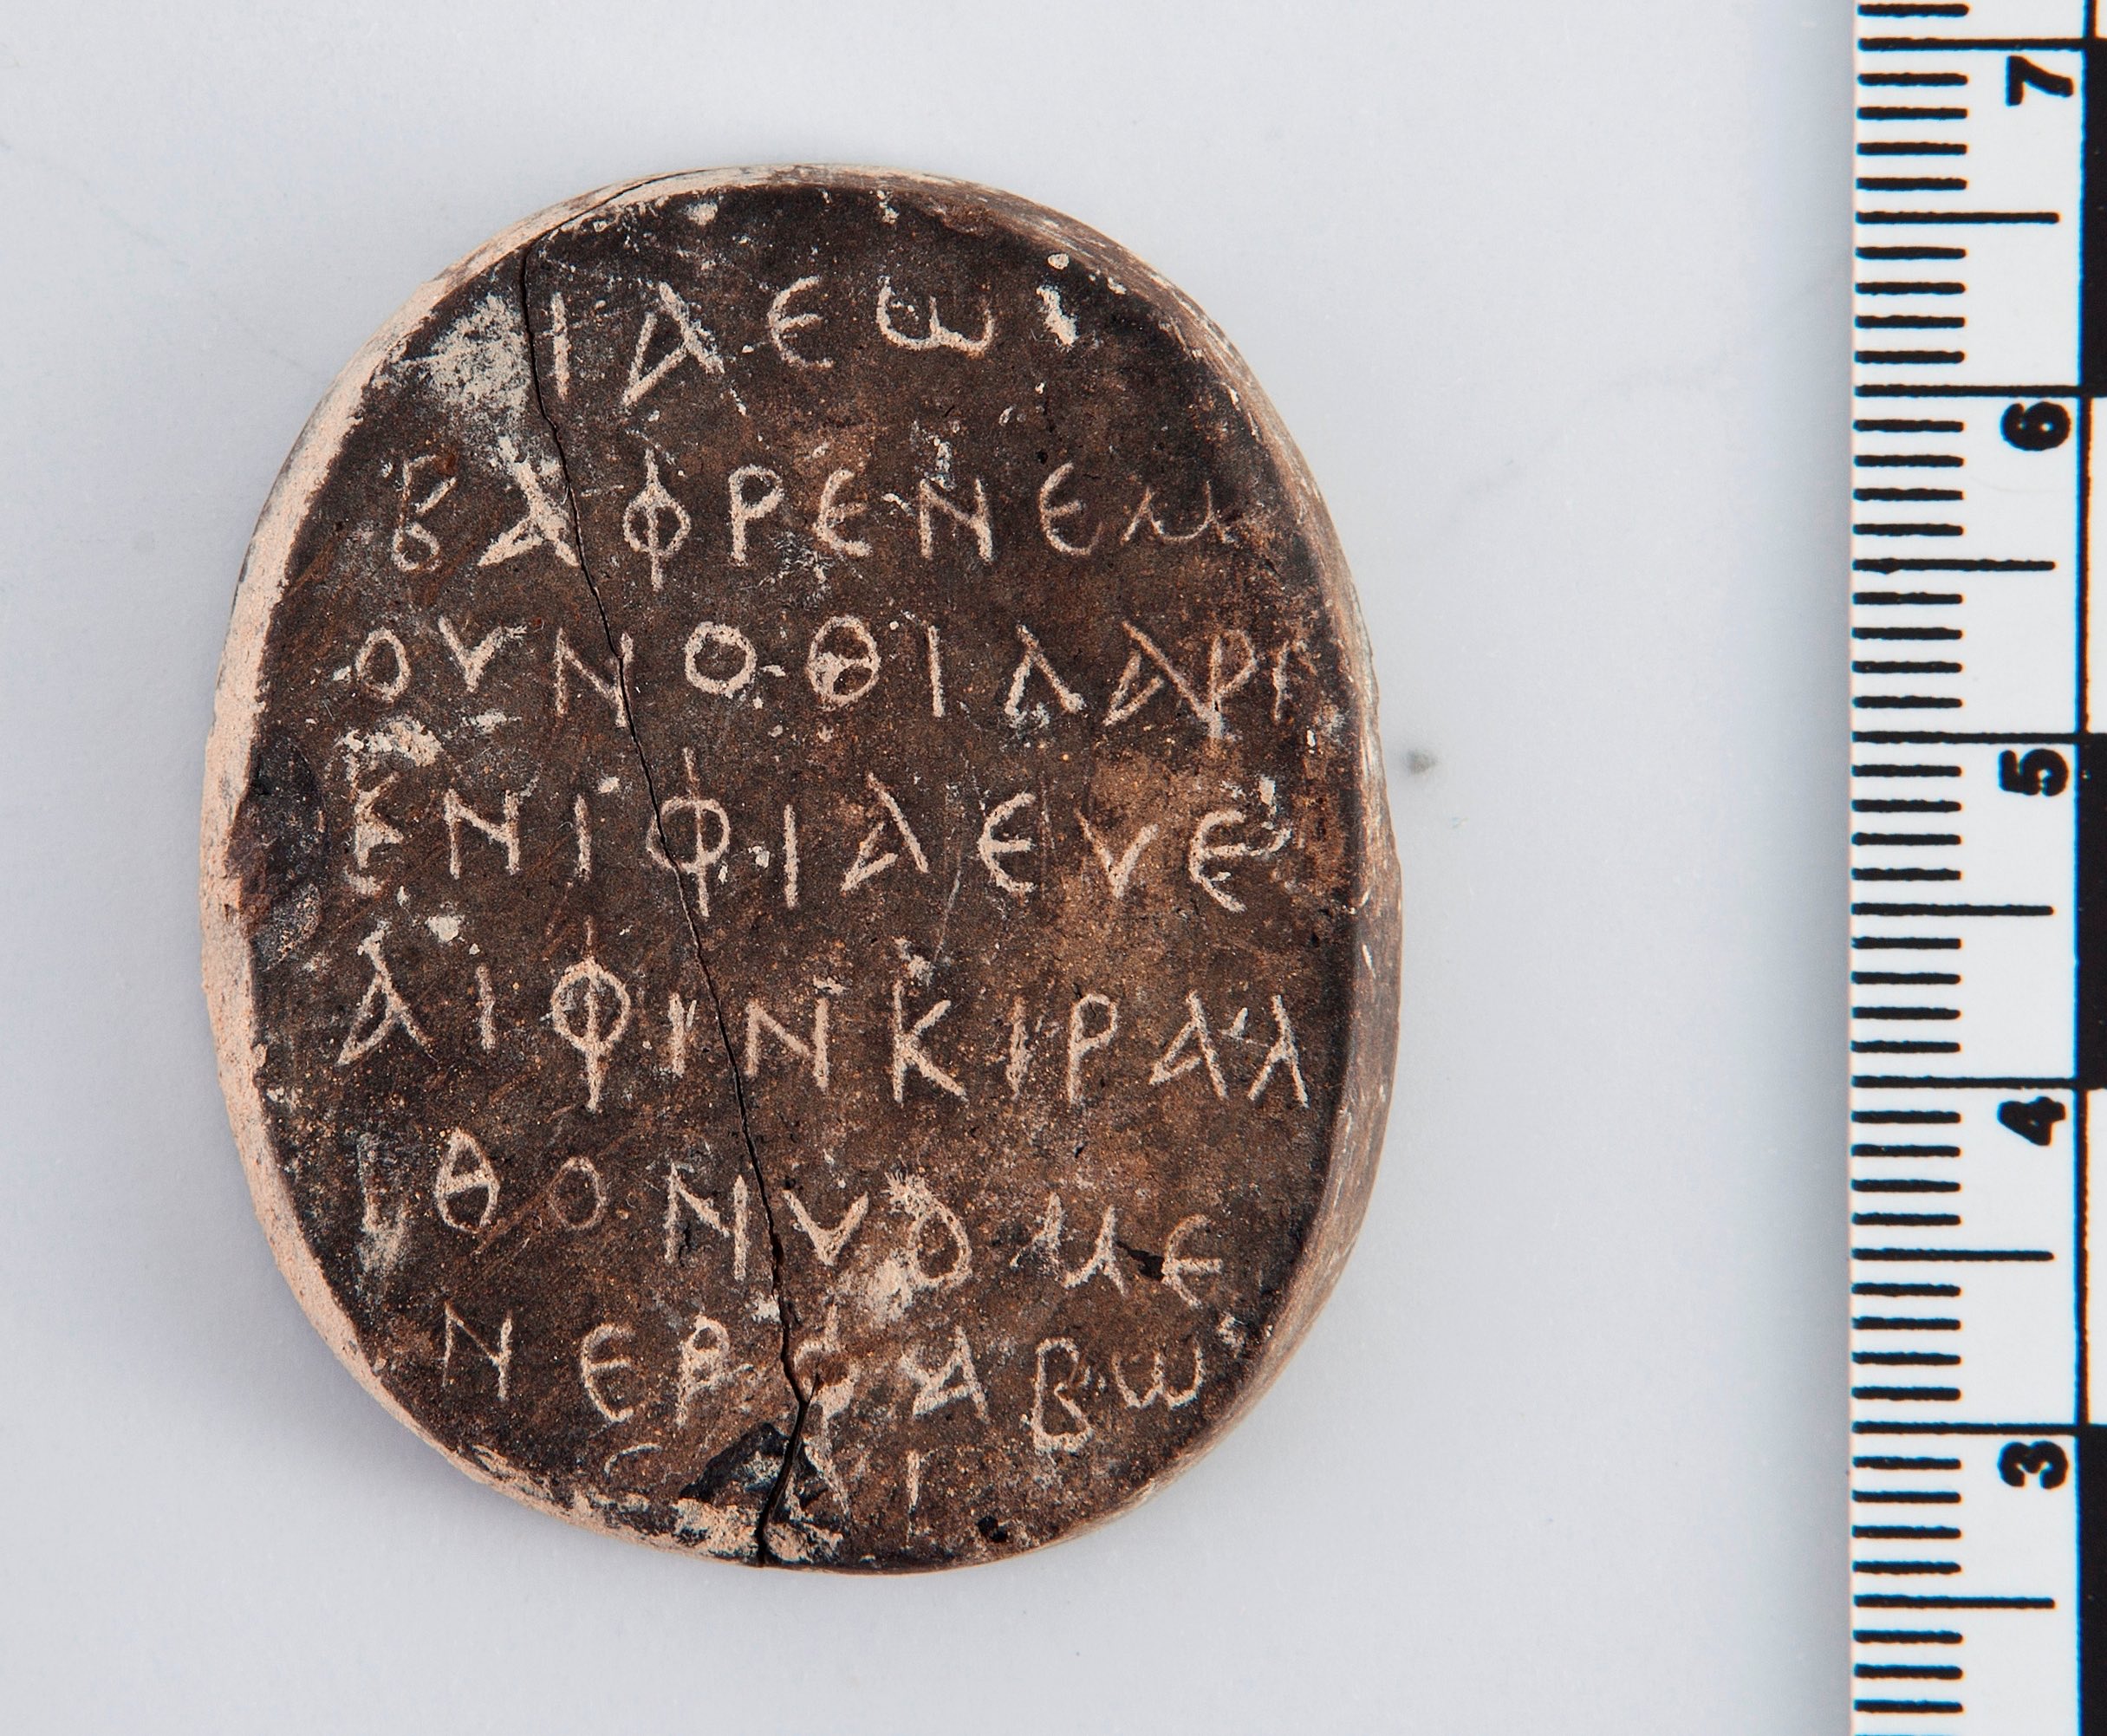 Ancient Amulet Discovered with Curious Palindrome Inscription | Live Science